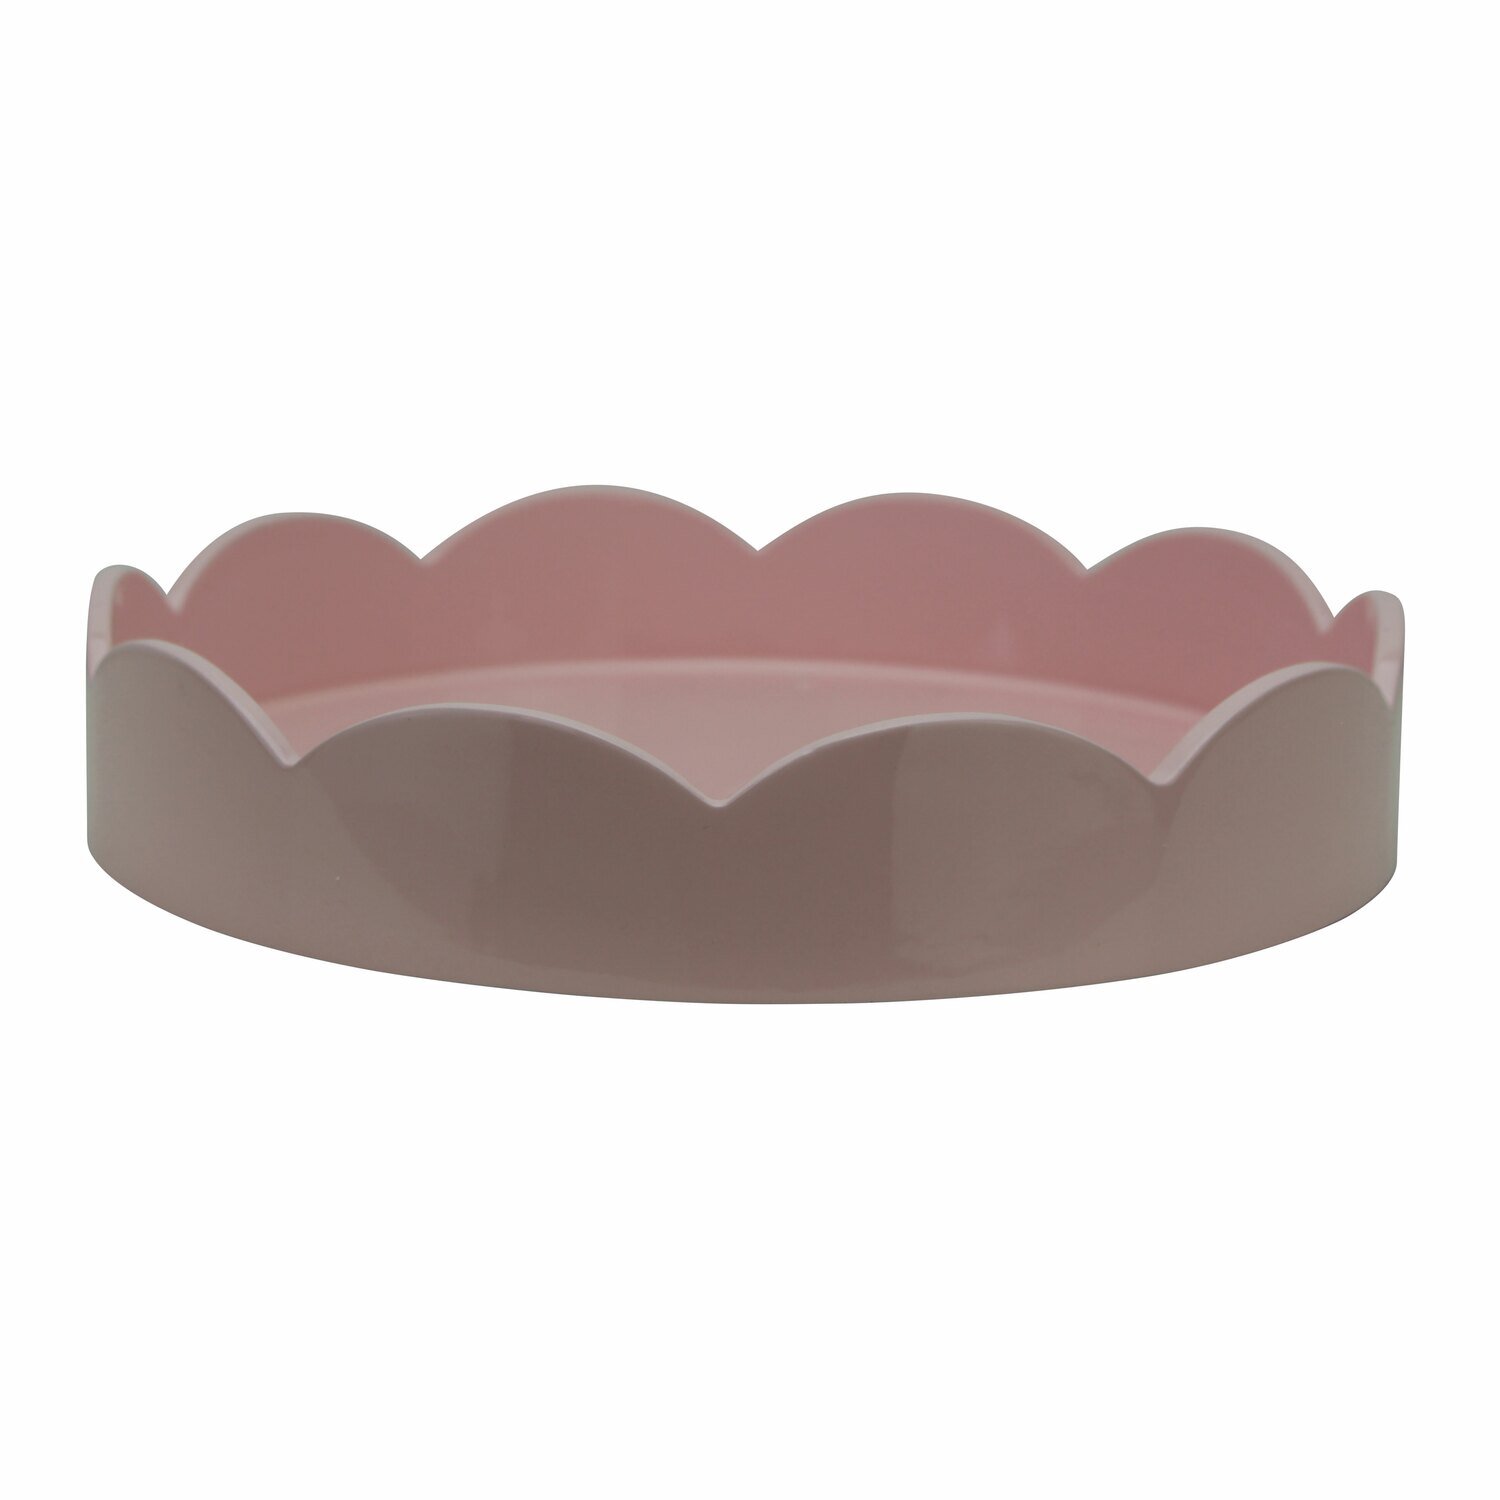 Addison Ross 8.5 x 8.5 Inch Scallop Tray Pale Pink Wood TR6403